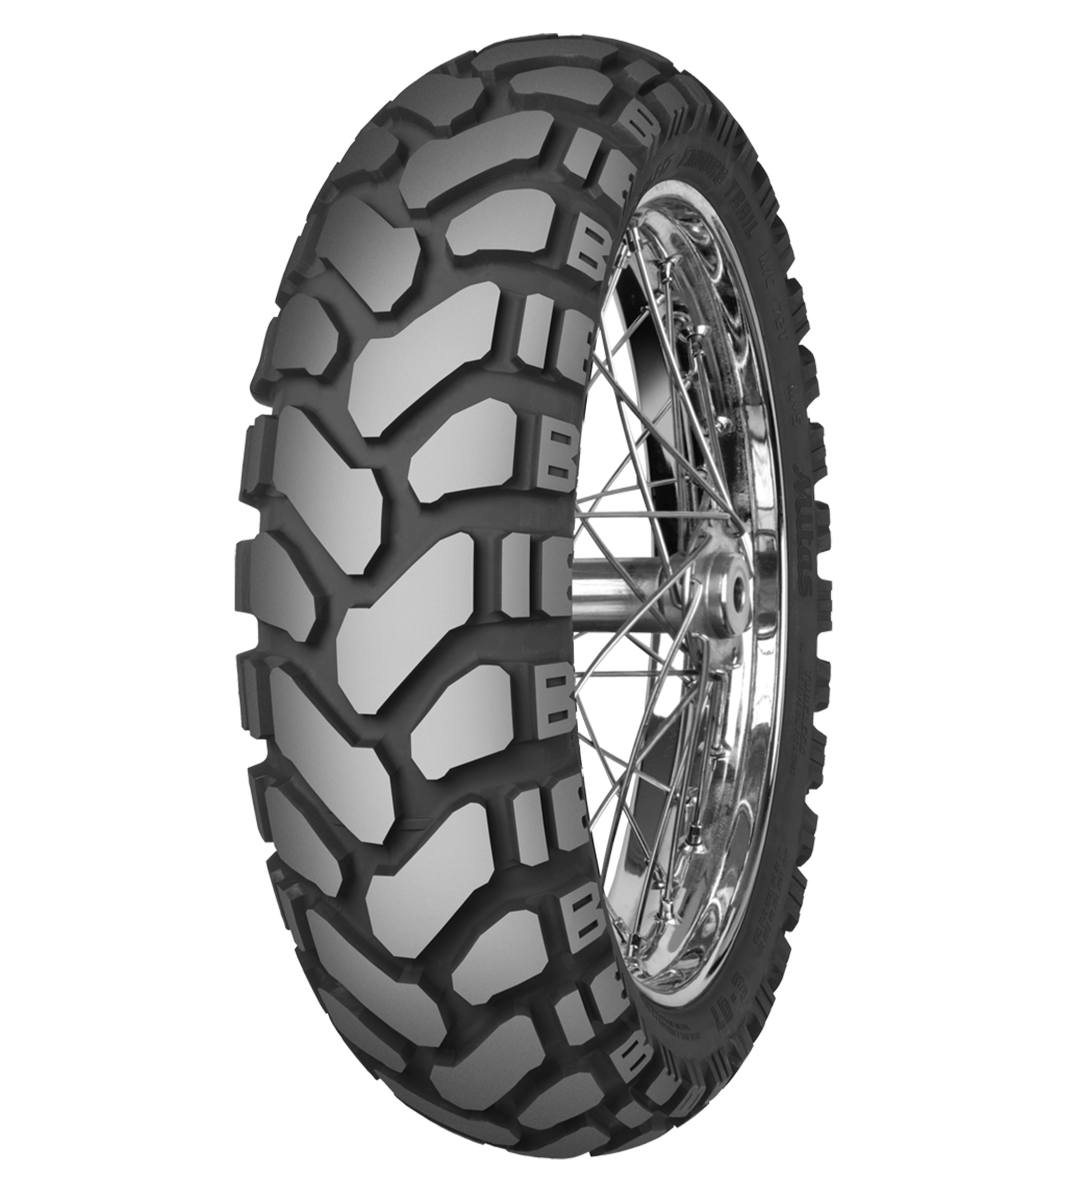 Mitas E-07+ ENDURO TRAIL 130/80B17 Trail ON Trail 65T No Stripe Tubeless Rear Tire, 224135, 130/80B17, Adventure Touring, E Series, E-07+ Enduro Trail, Rear, Trail, Trail ON, Tires - Imported and distributed in North & South America by Lindeco Genuine Powersports - Premier Powersports Equipment and Accessories for Motorcycle Enthusiasts, Professional Riders and Dealers.